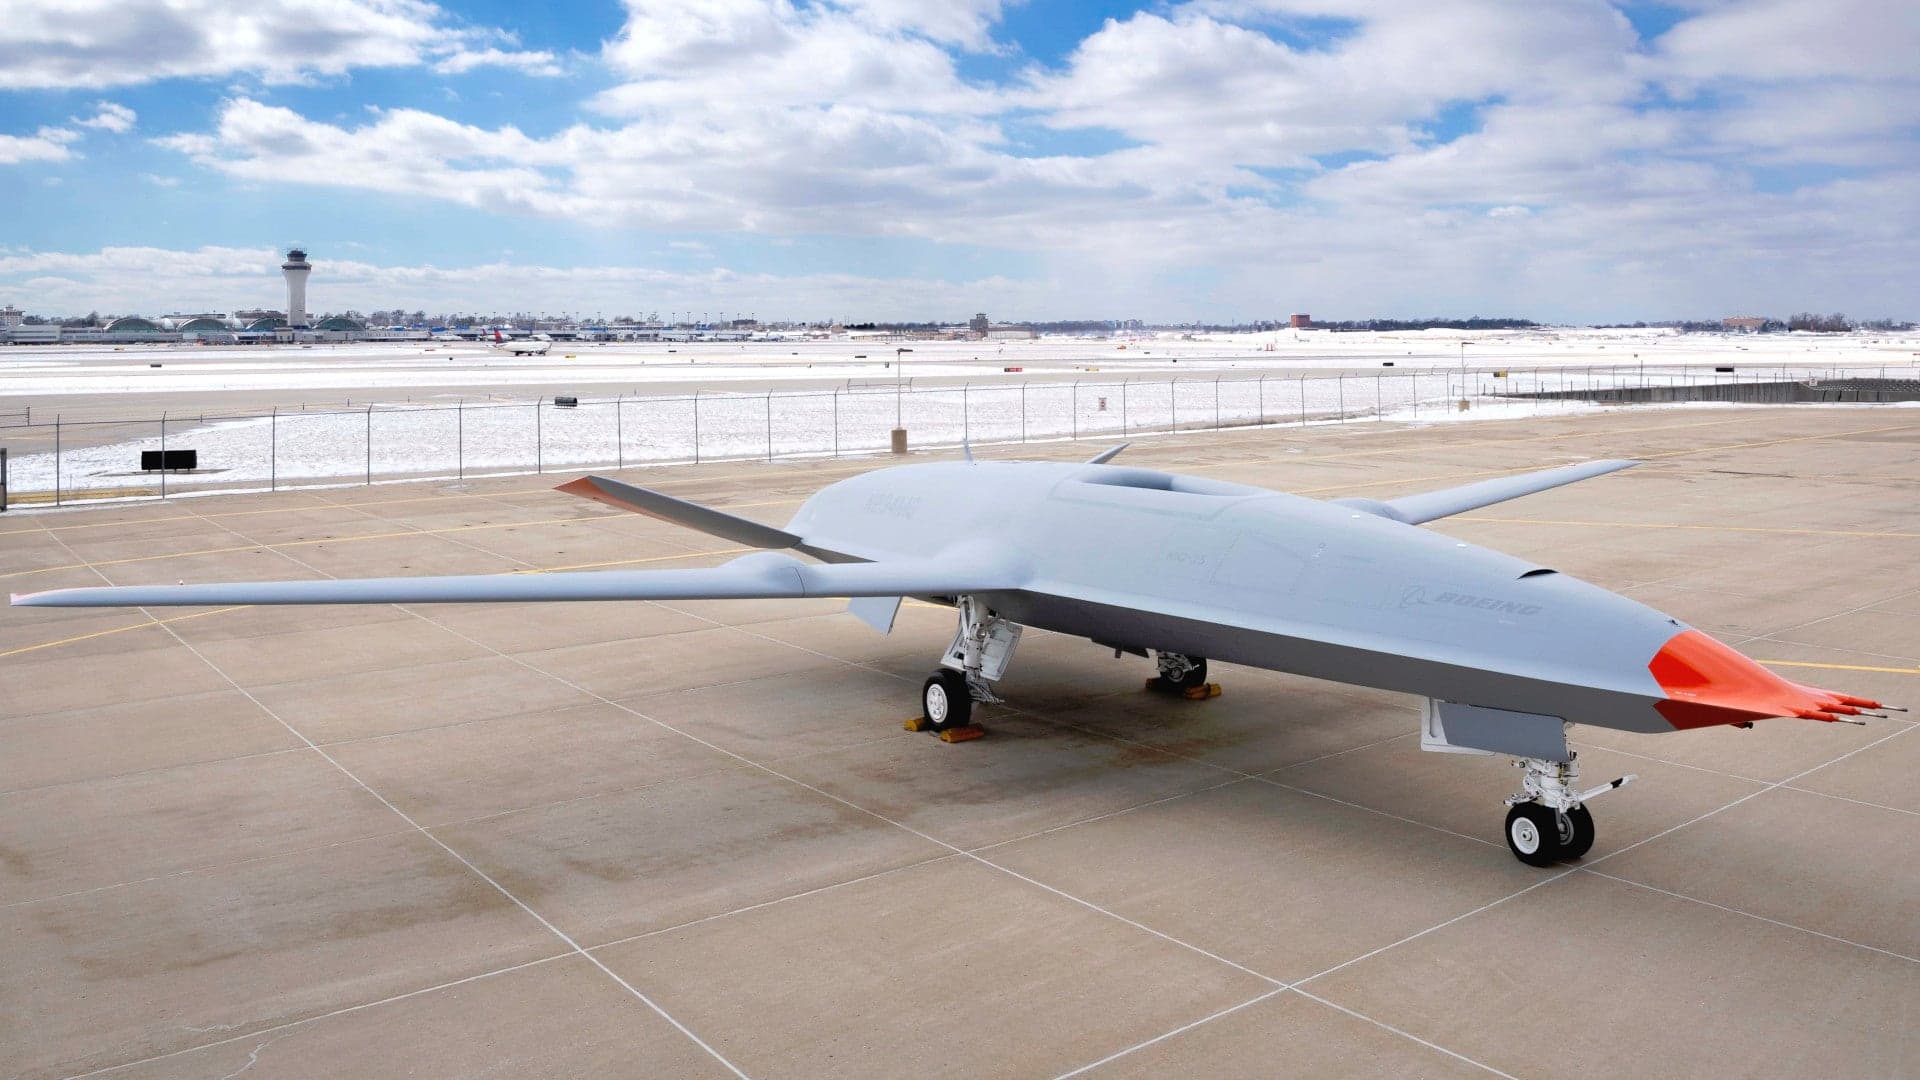 U.S. Intelligence Agency Eyes The Navy’s MQ-25 Drone For Maritime Surveillance Missions